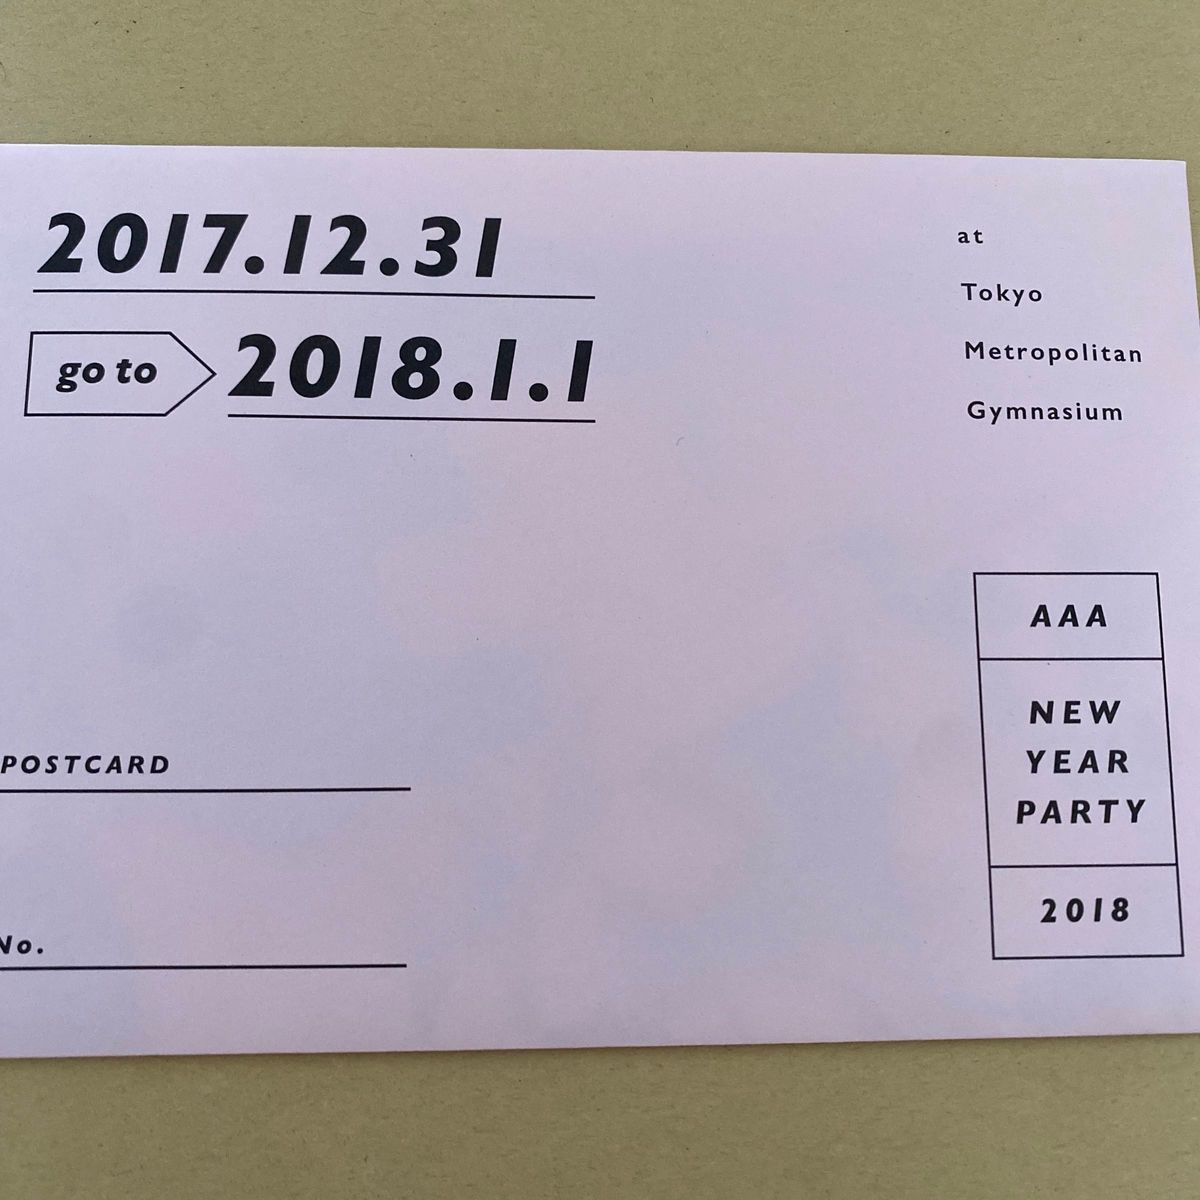 AAA NEW YEAR PARTY 2018 ポストカード